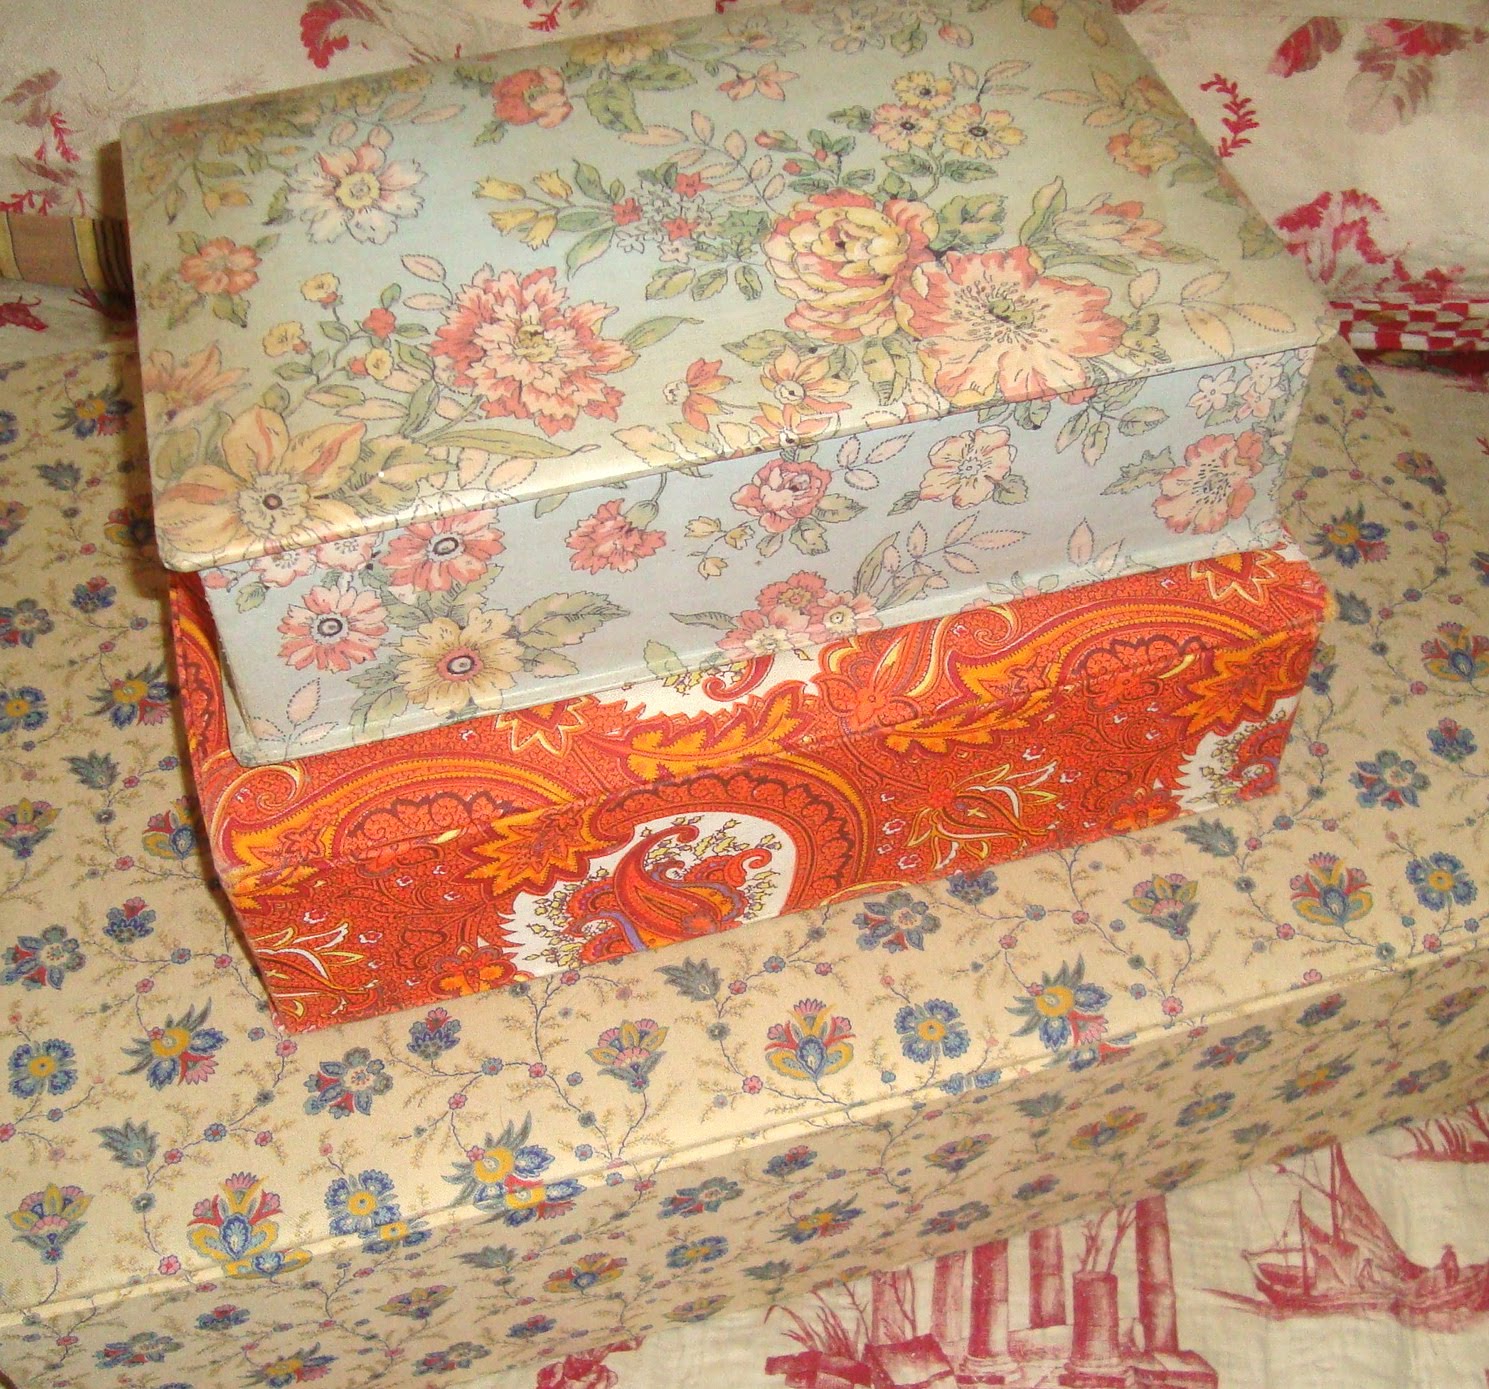 Interesting Antique Textiles: You can never have too many boxes ...